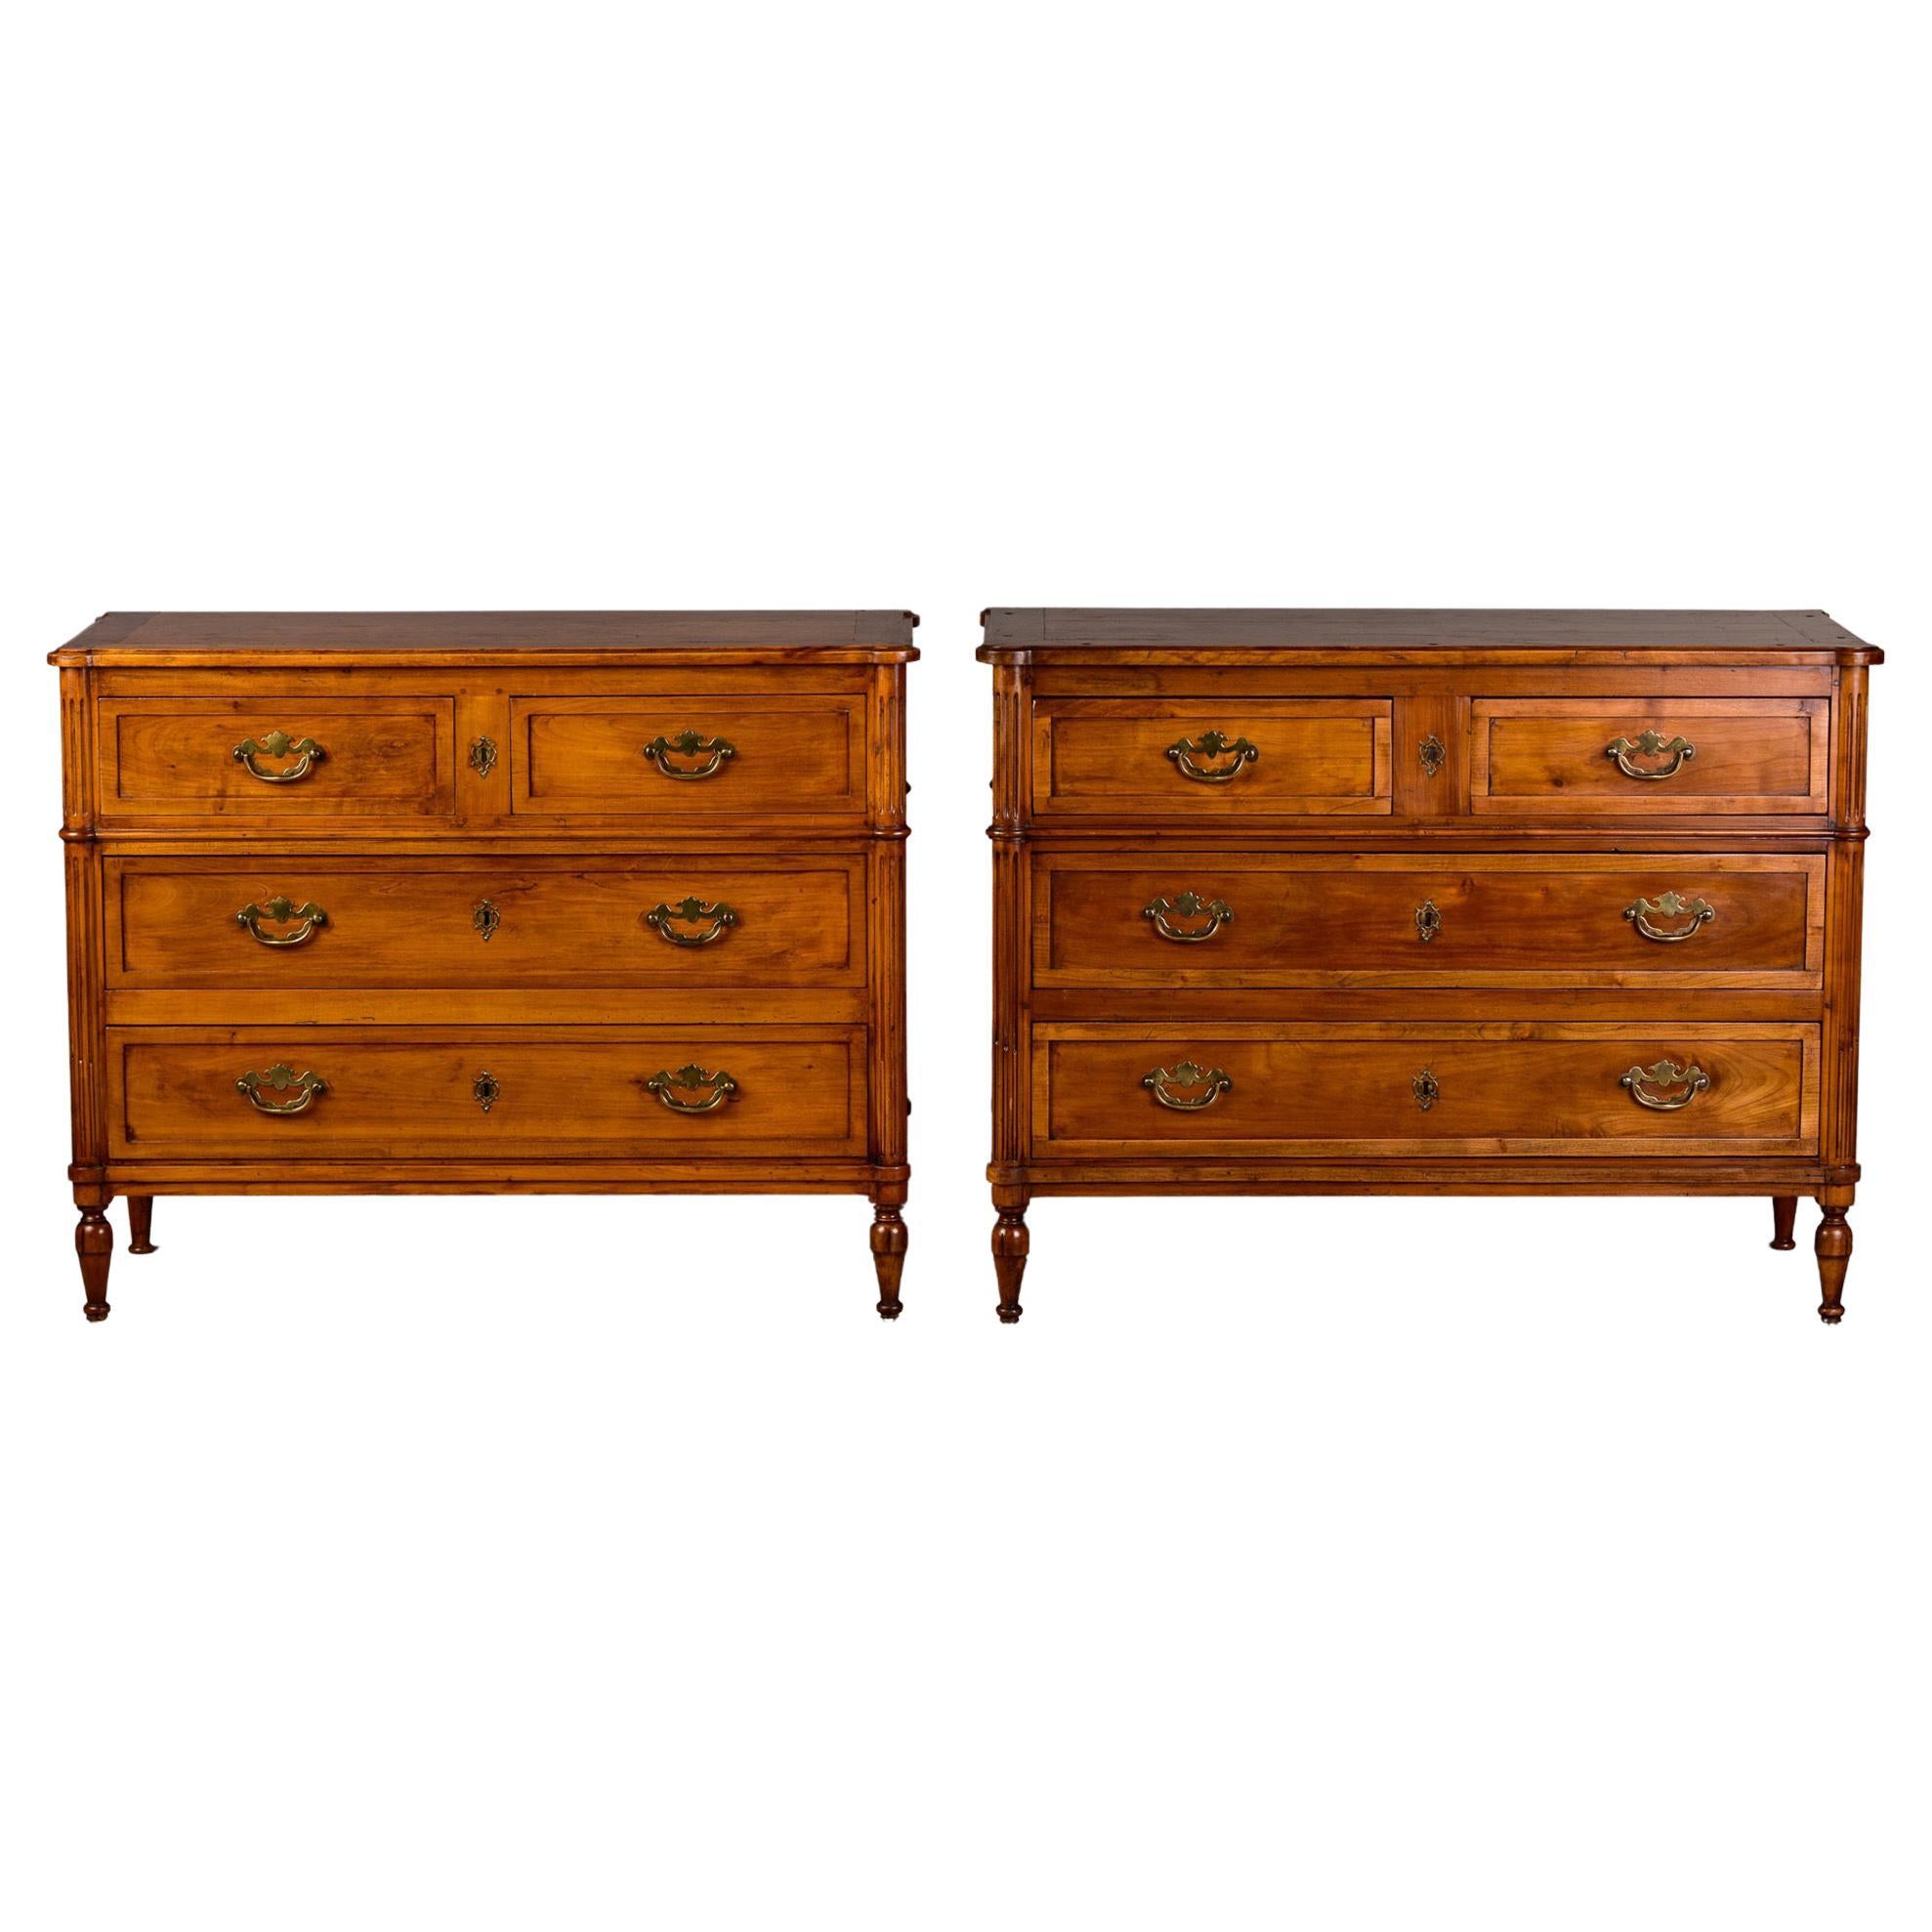 Late 19th C Near Pair of Cherry Chests of Drawers